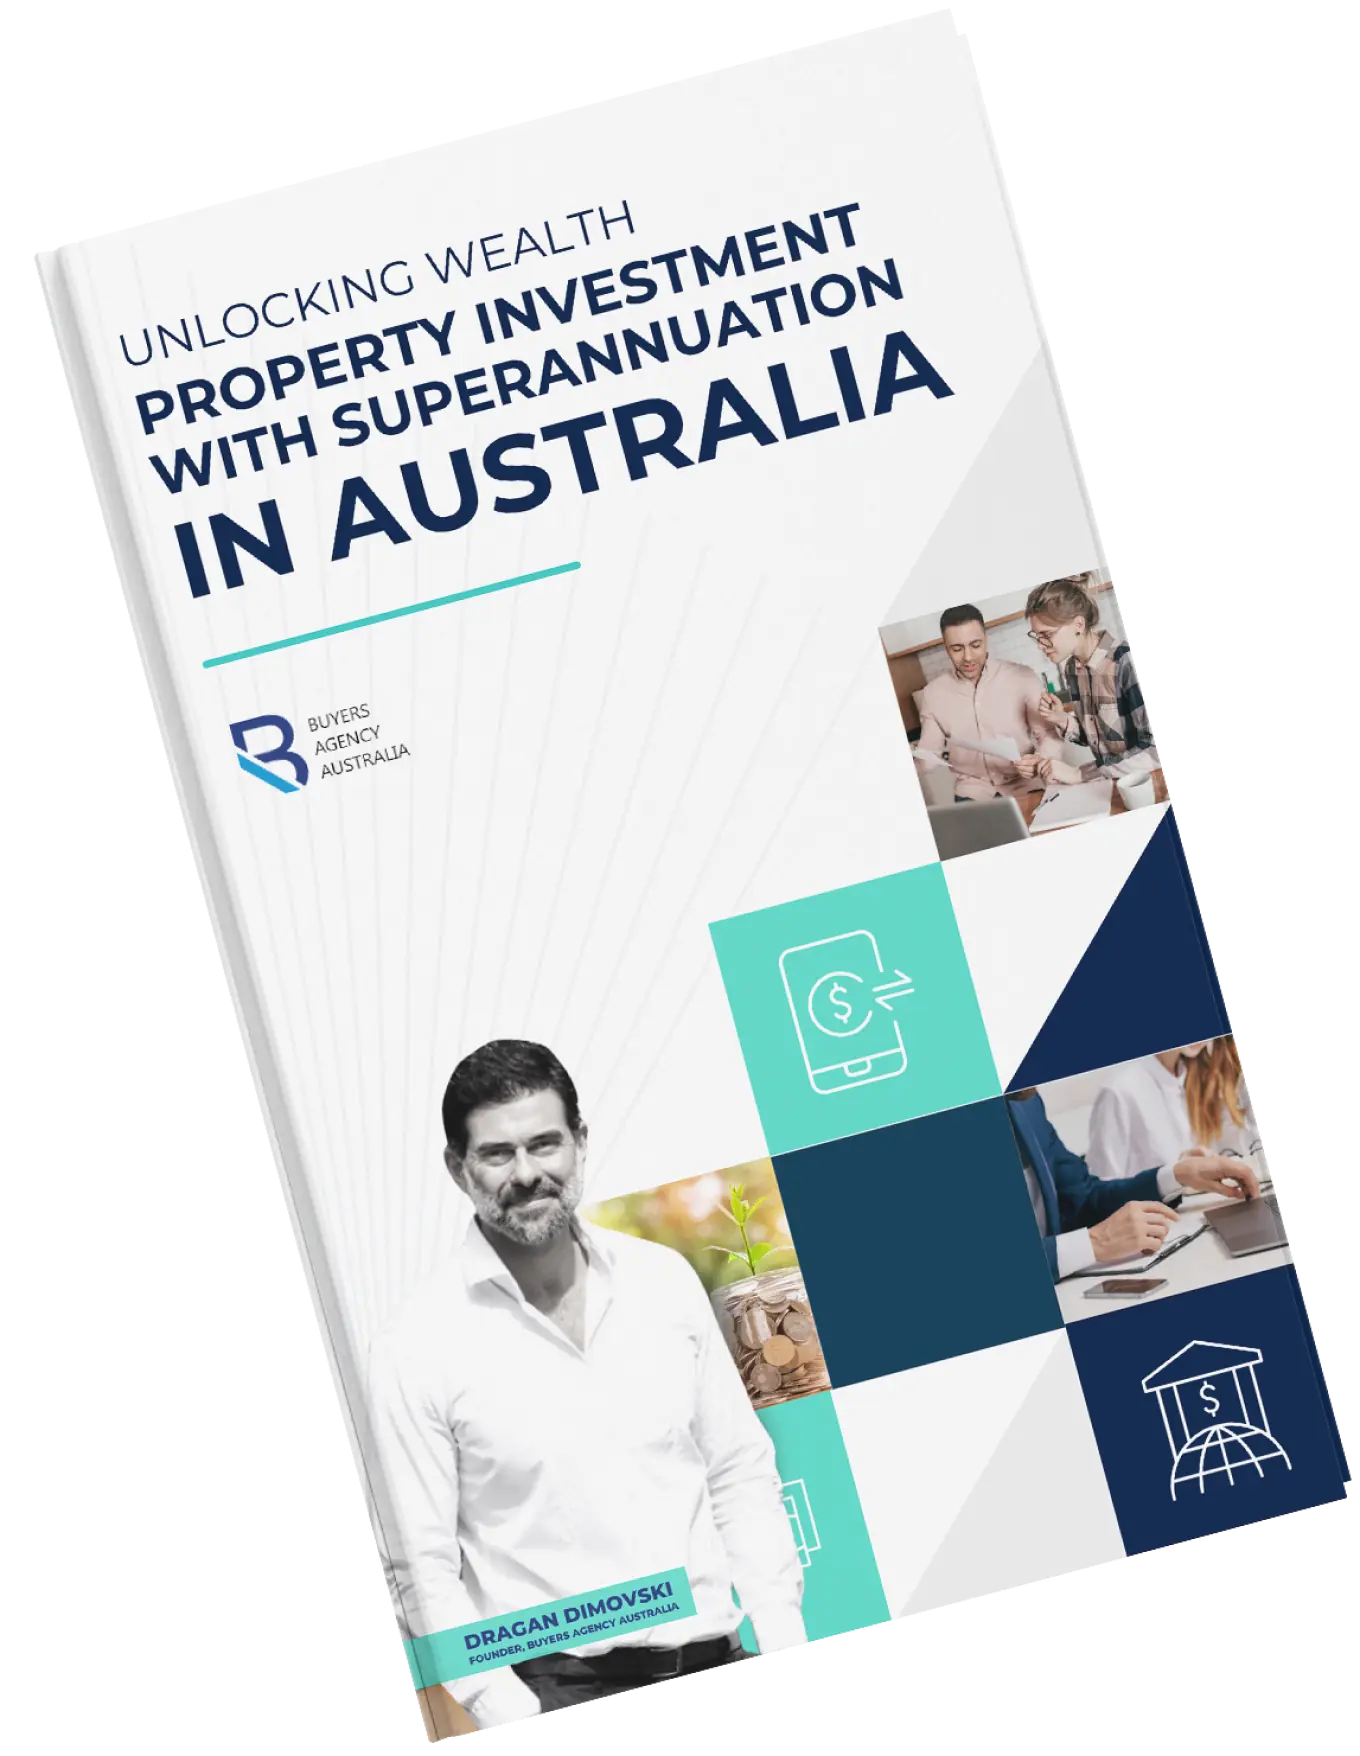 Unlocking Wealth Property Investment with Superannuation in Australiabookmockup